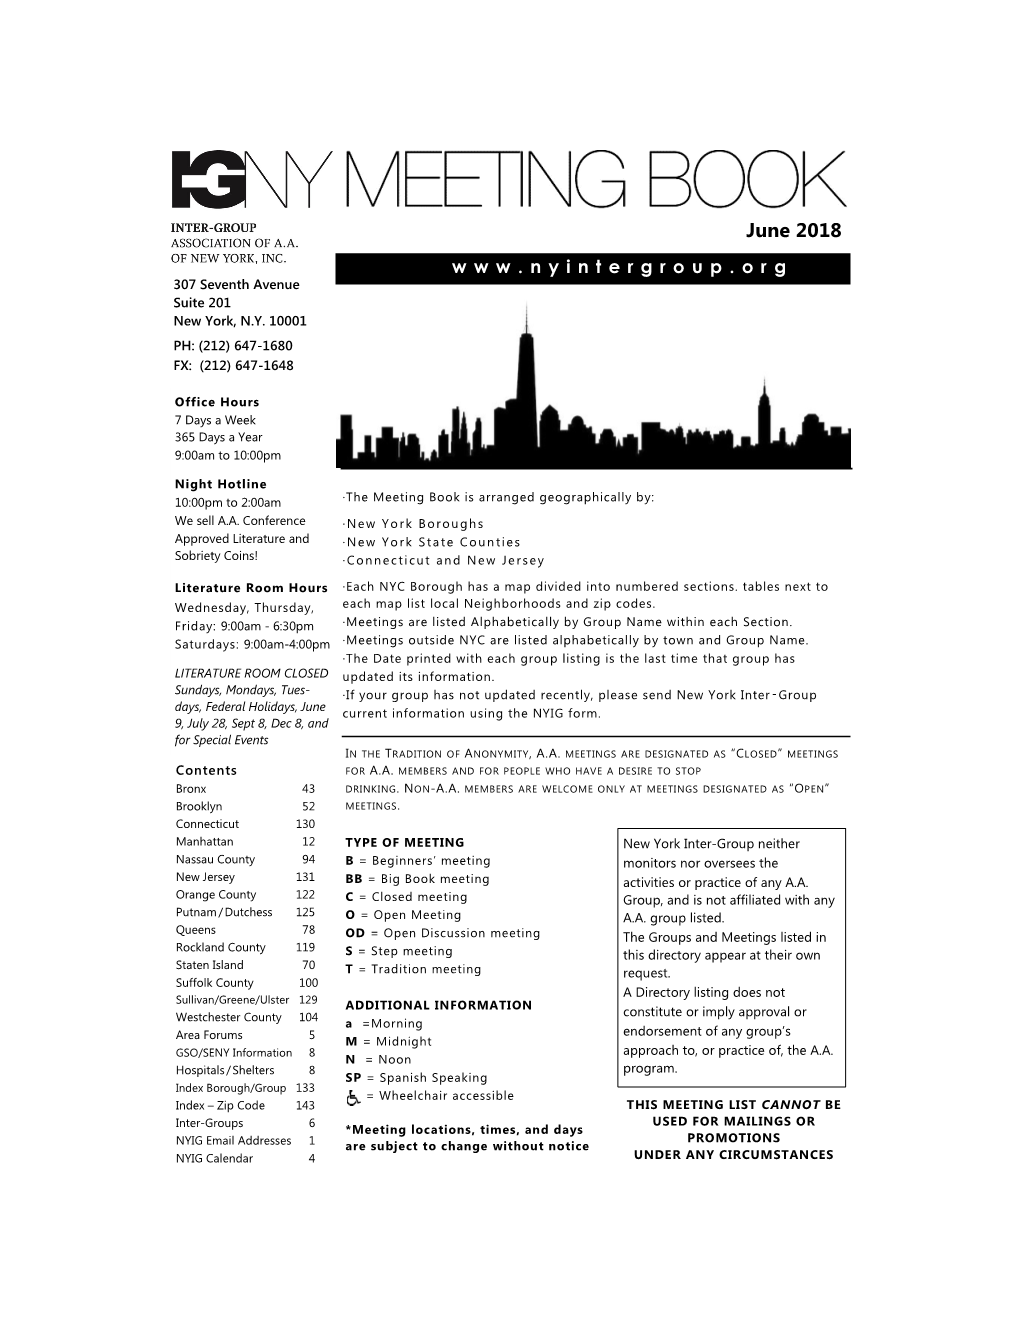 Meeting List Cannot Be